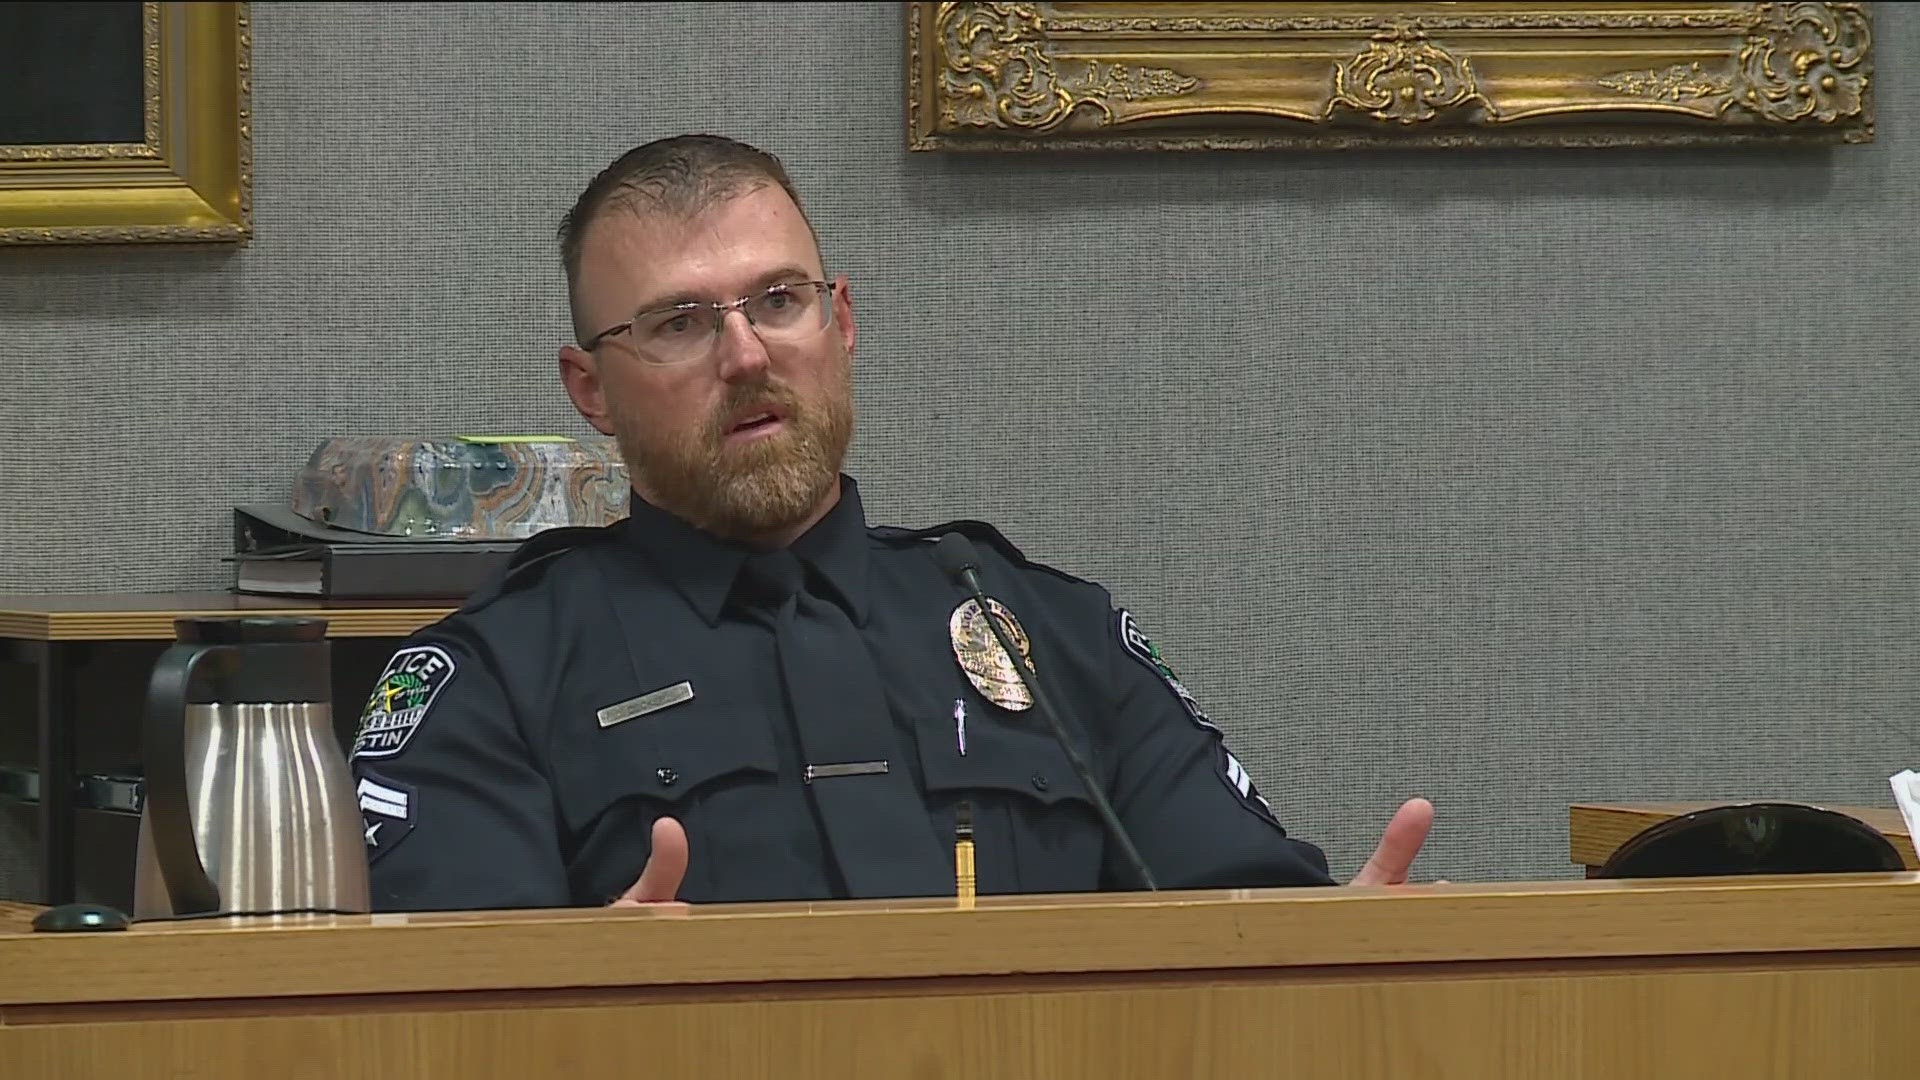 The Christopher Taylor murder trial has entered its second week. Taylor is the Austin police officer accused of murdering Michael Ramos in 2020.